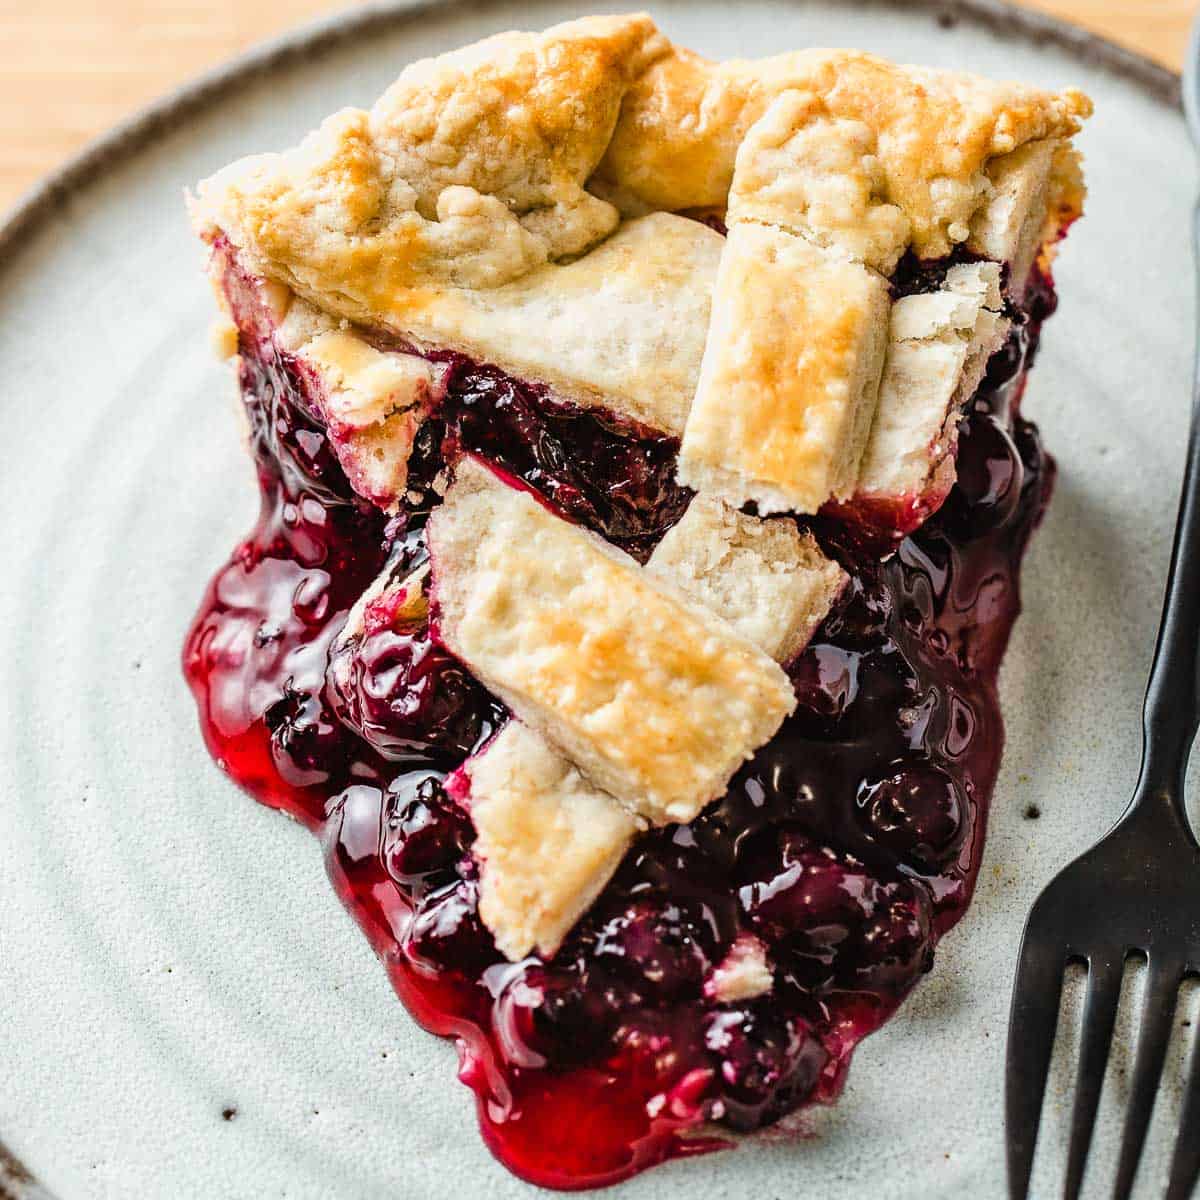 A slice of blueberry pie on a plate.